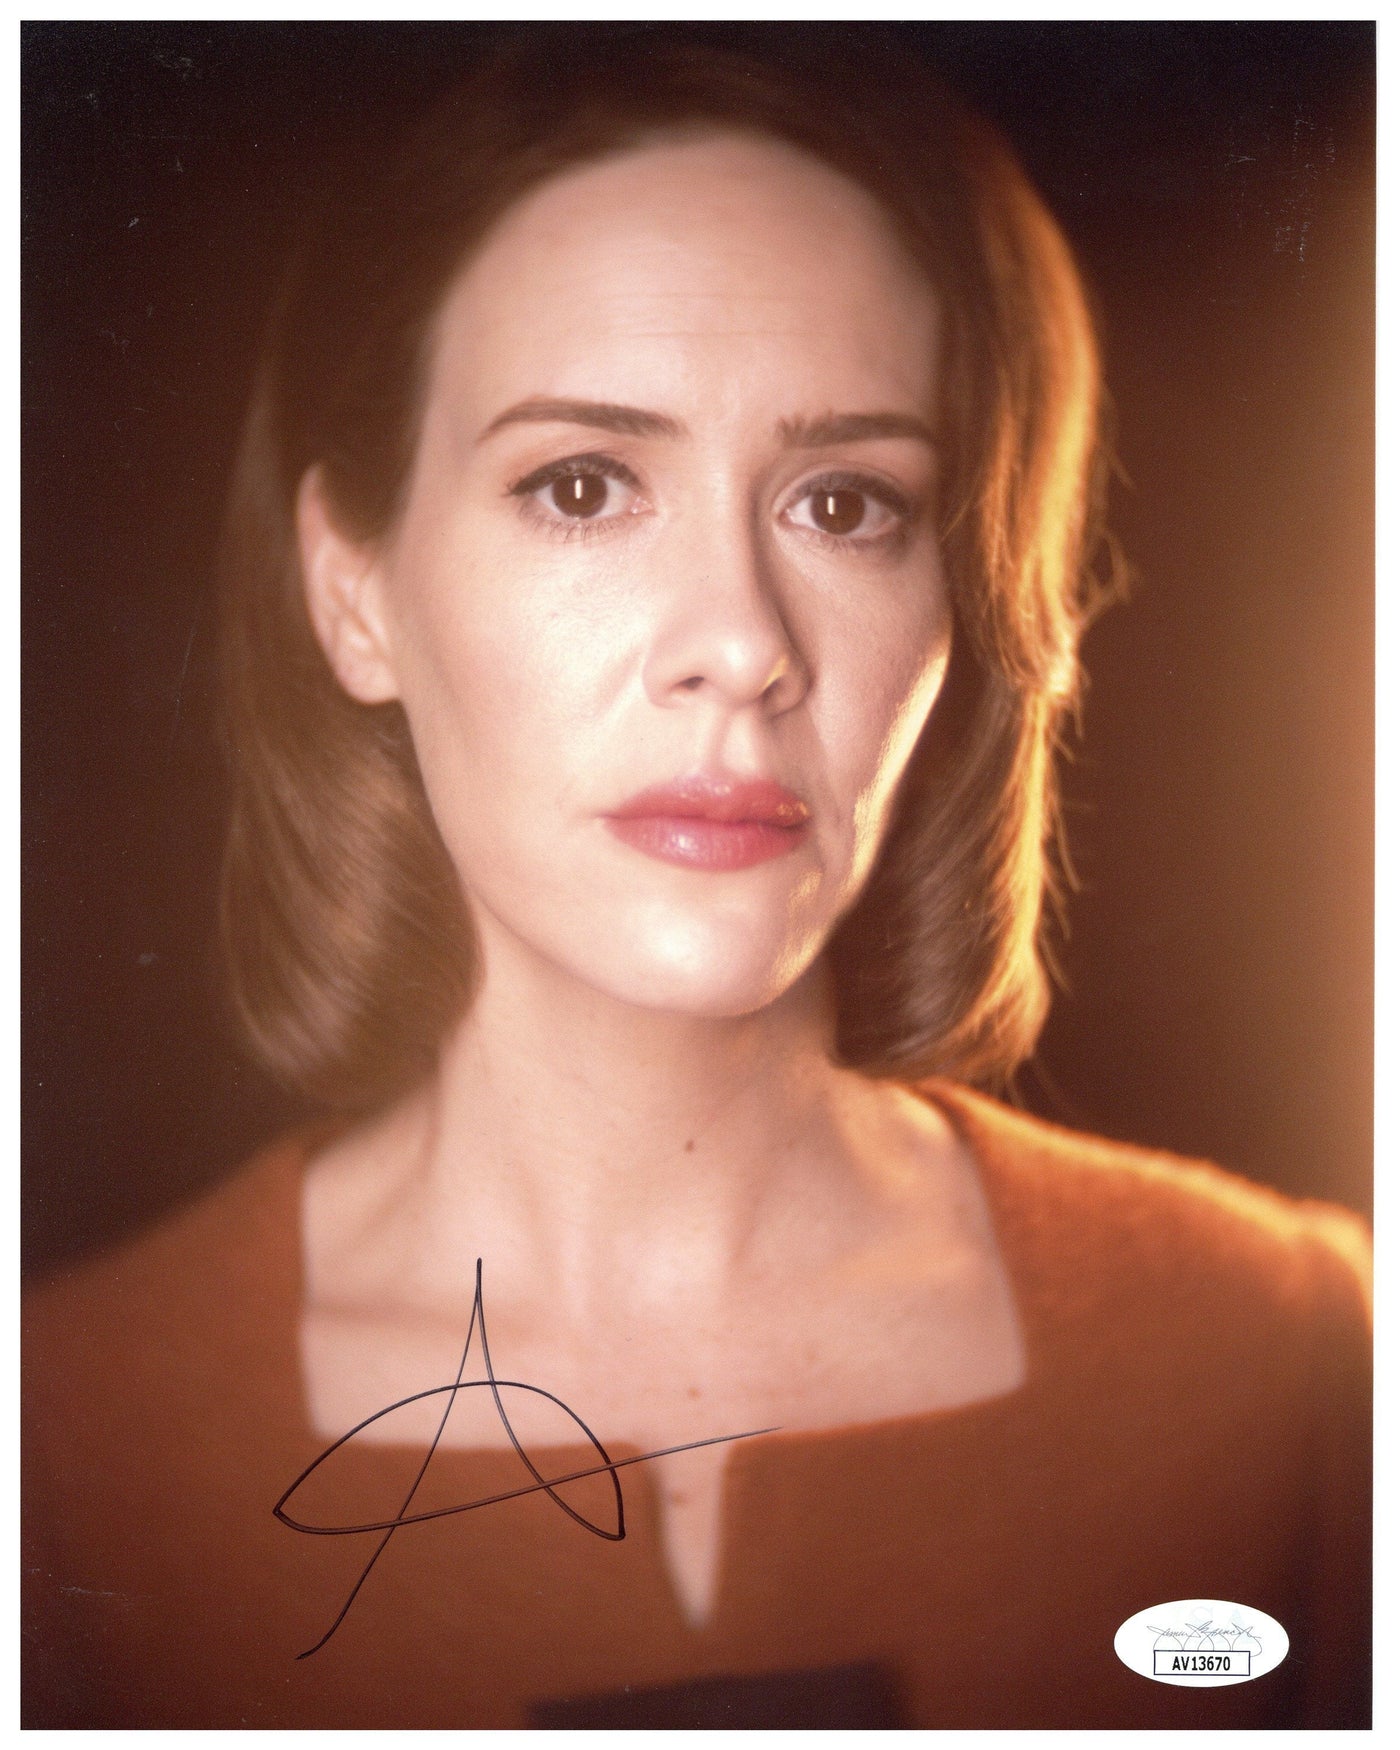 Sarah Paulson Signed 8x10 Photo Authentic American Horror Story Autographed JSA #3